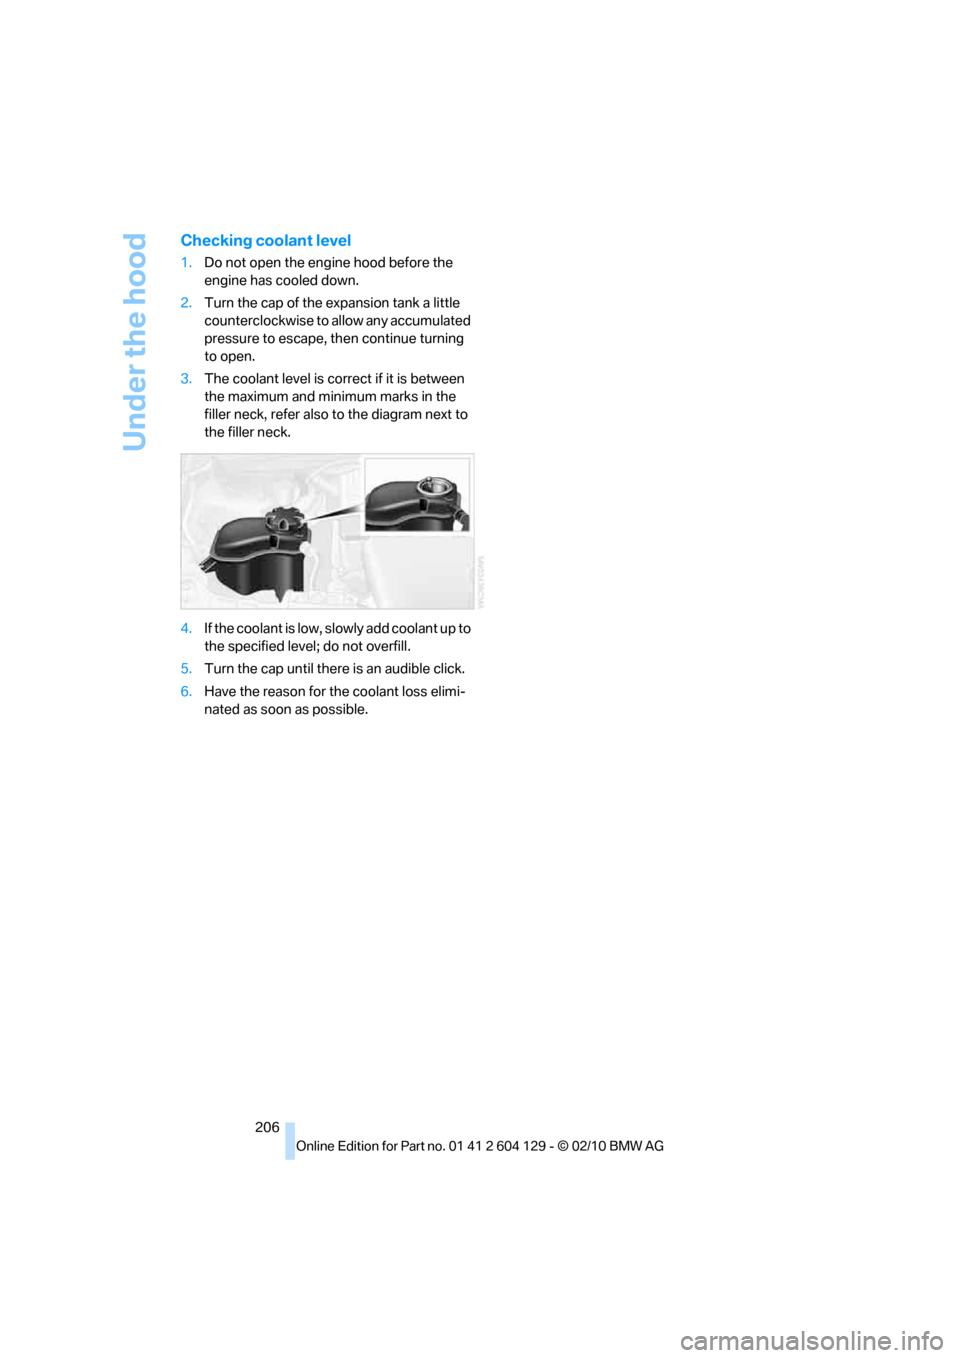 BMW 128I COUPE 2011 E82 Owners Manual Under the hood
206
Checking coolant level
1.Do not open the engine hood before the 
engine has cooled down.
2.Turn the cap of the expansion tank a little 
counterclockwise to allow any accumulated 
pr